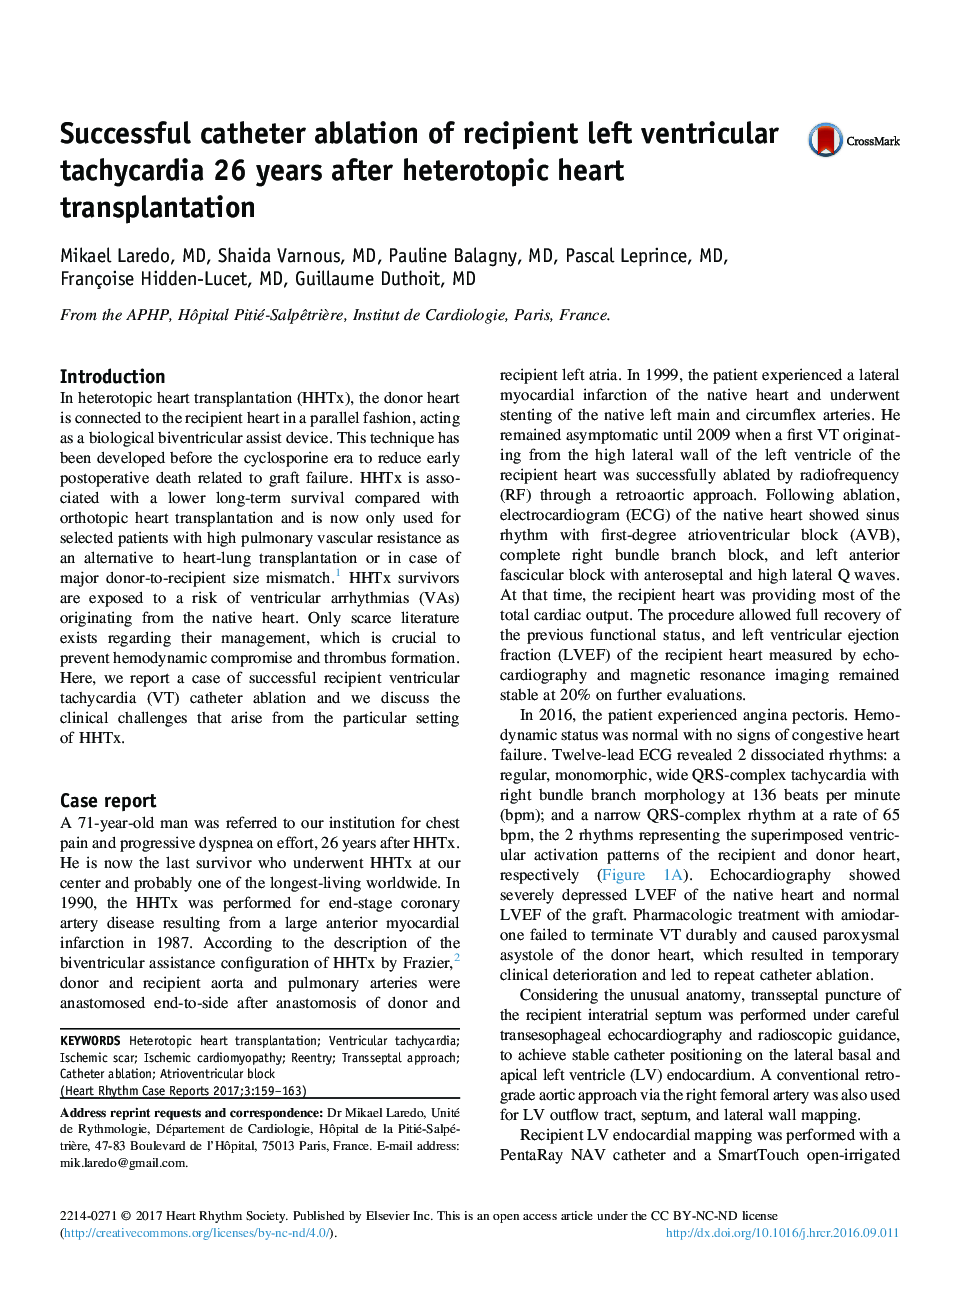 Successful catheter ablation of recipient left ventricular tachycardia 26 years after heterotopic heart transplantation